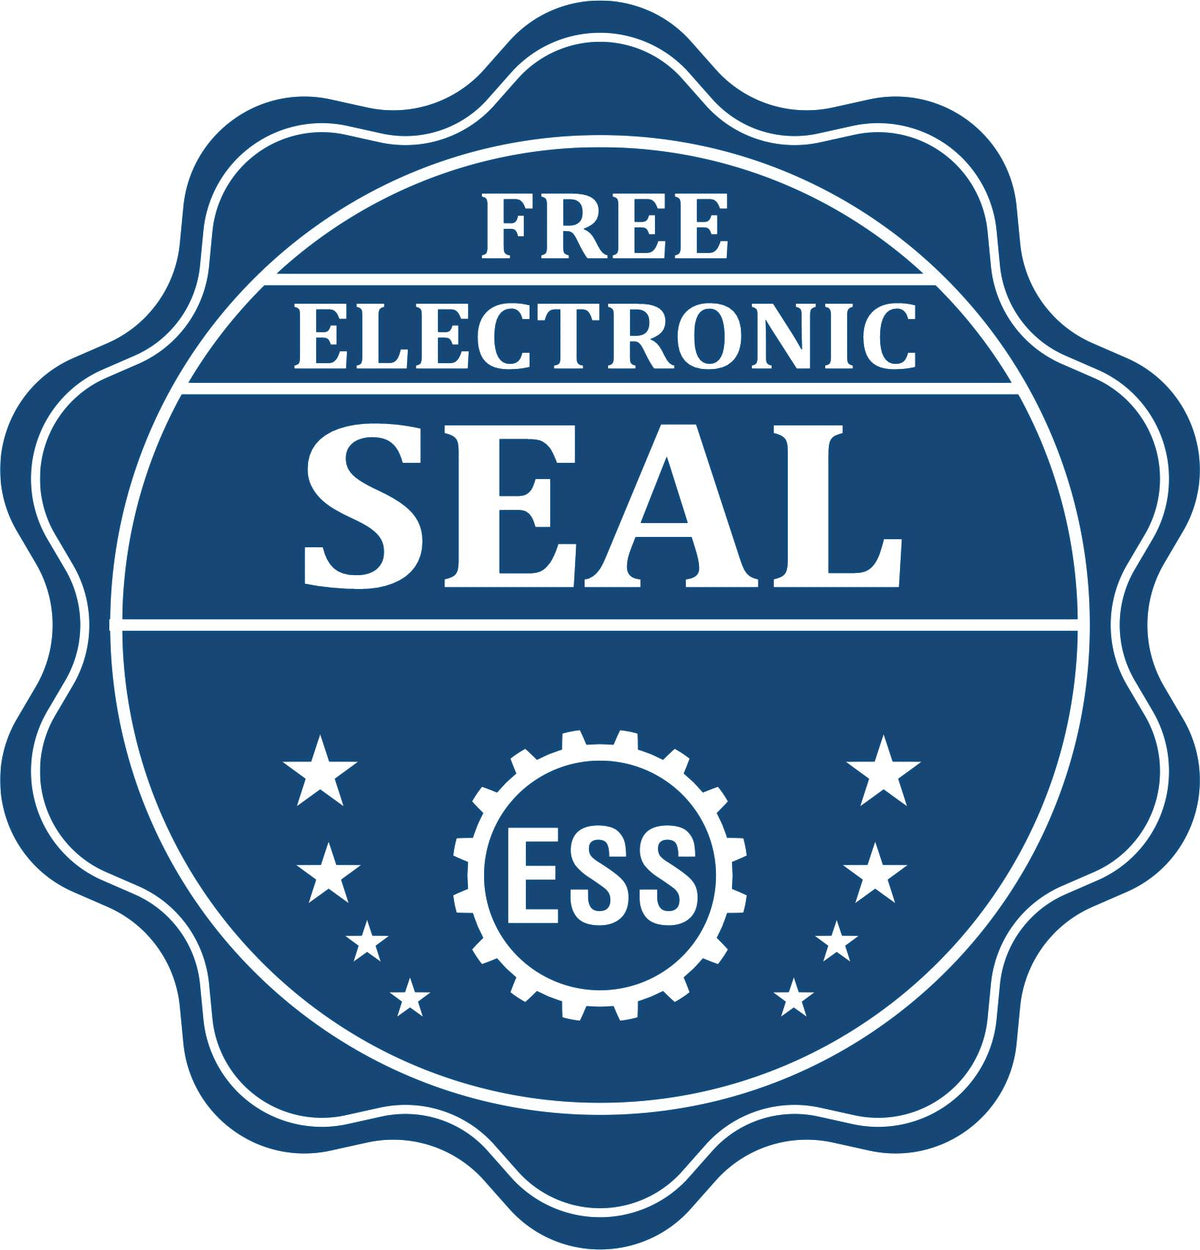 A badge showing a free electronic seal for the Premium MaxLight Pre-Inked North Carolina Engineering Stamp with stars and the ESS gear on the emblem.